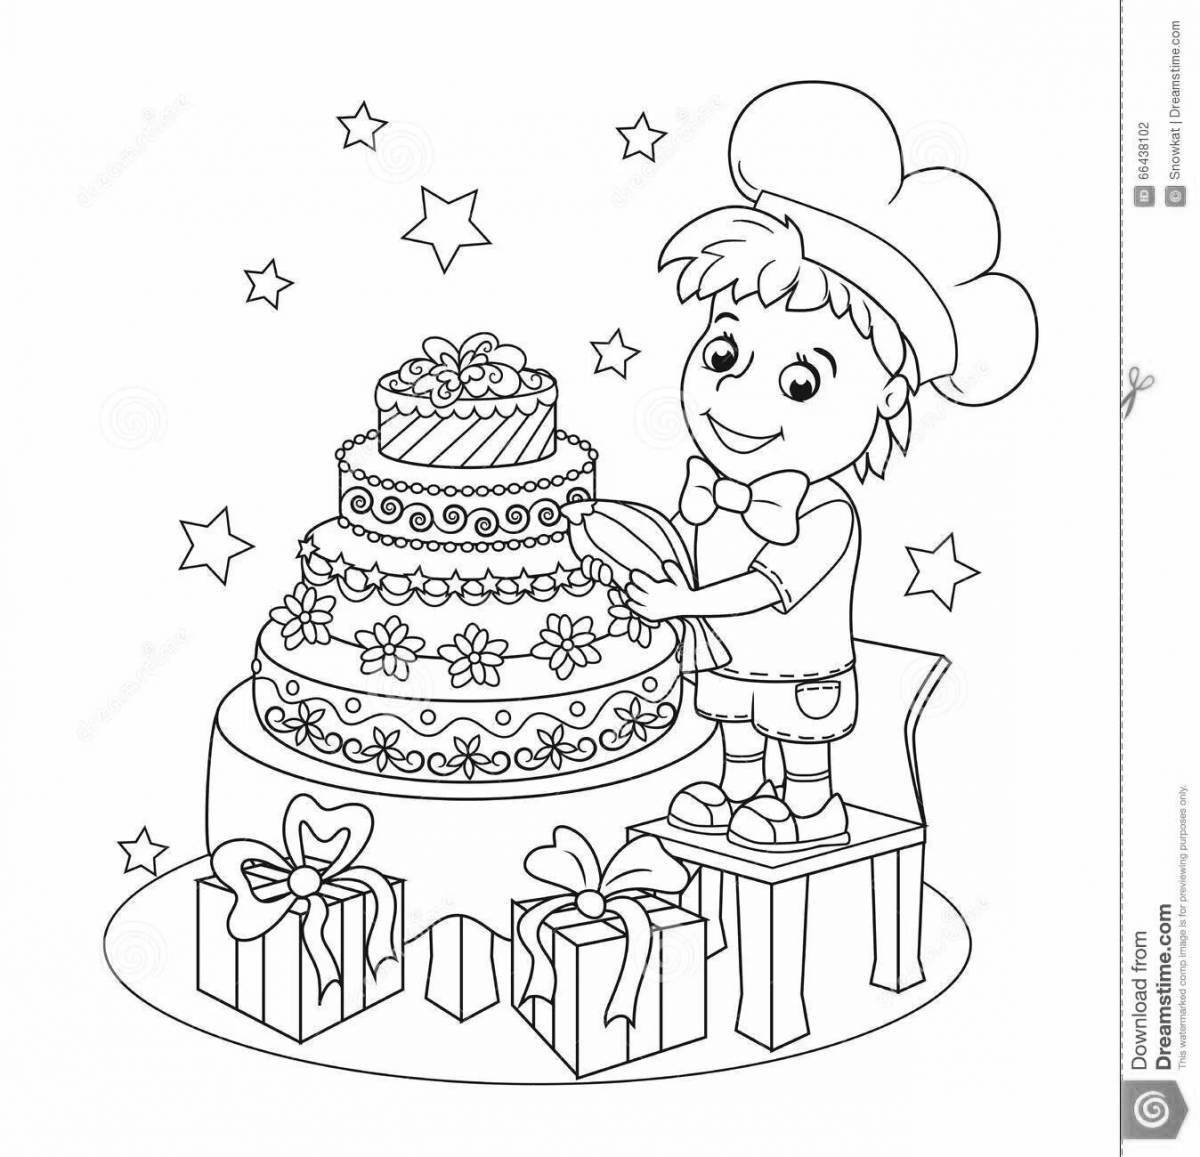 Color wild pastry chef coloring page